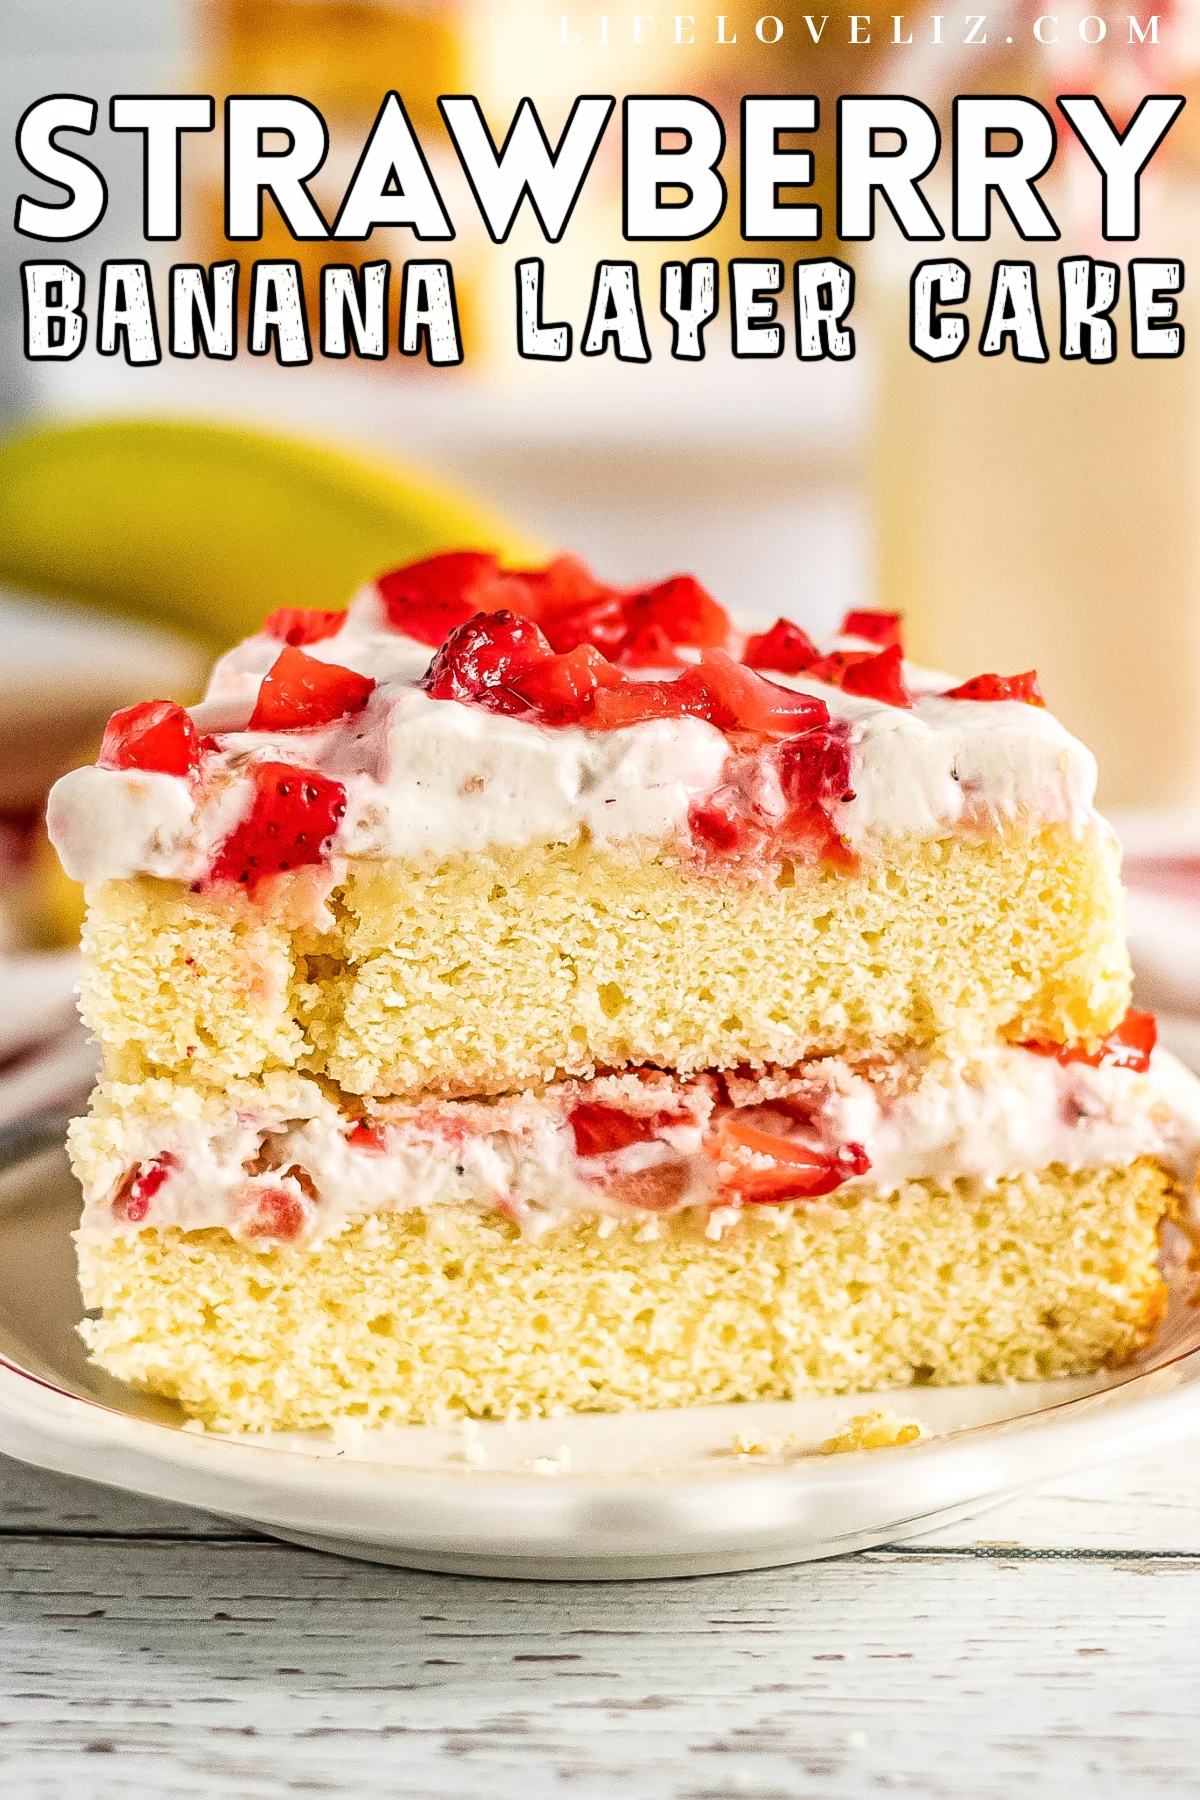 An easy recipe for a strawberry banana layer cake with layers of creamy whipped cream frosting made with fresh bananas and strawberries.